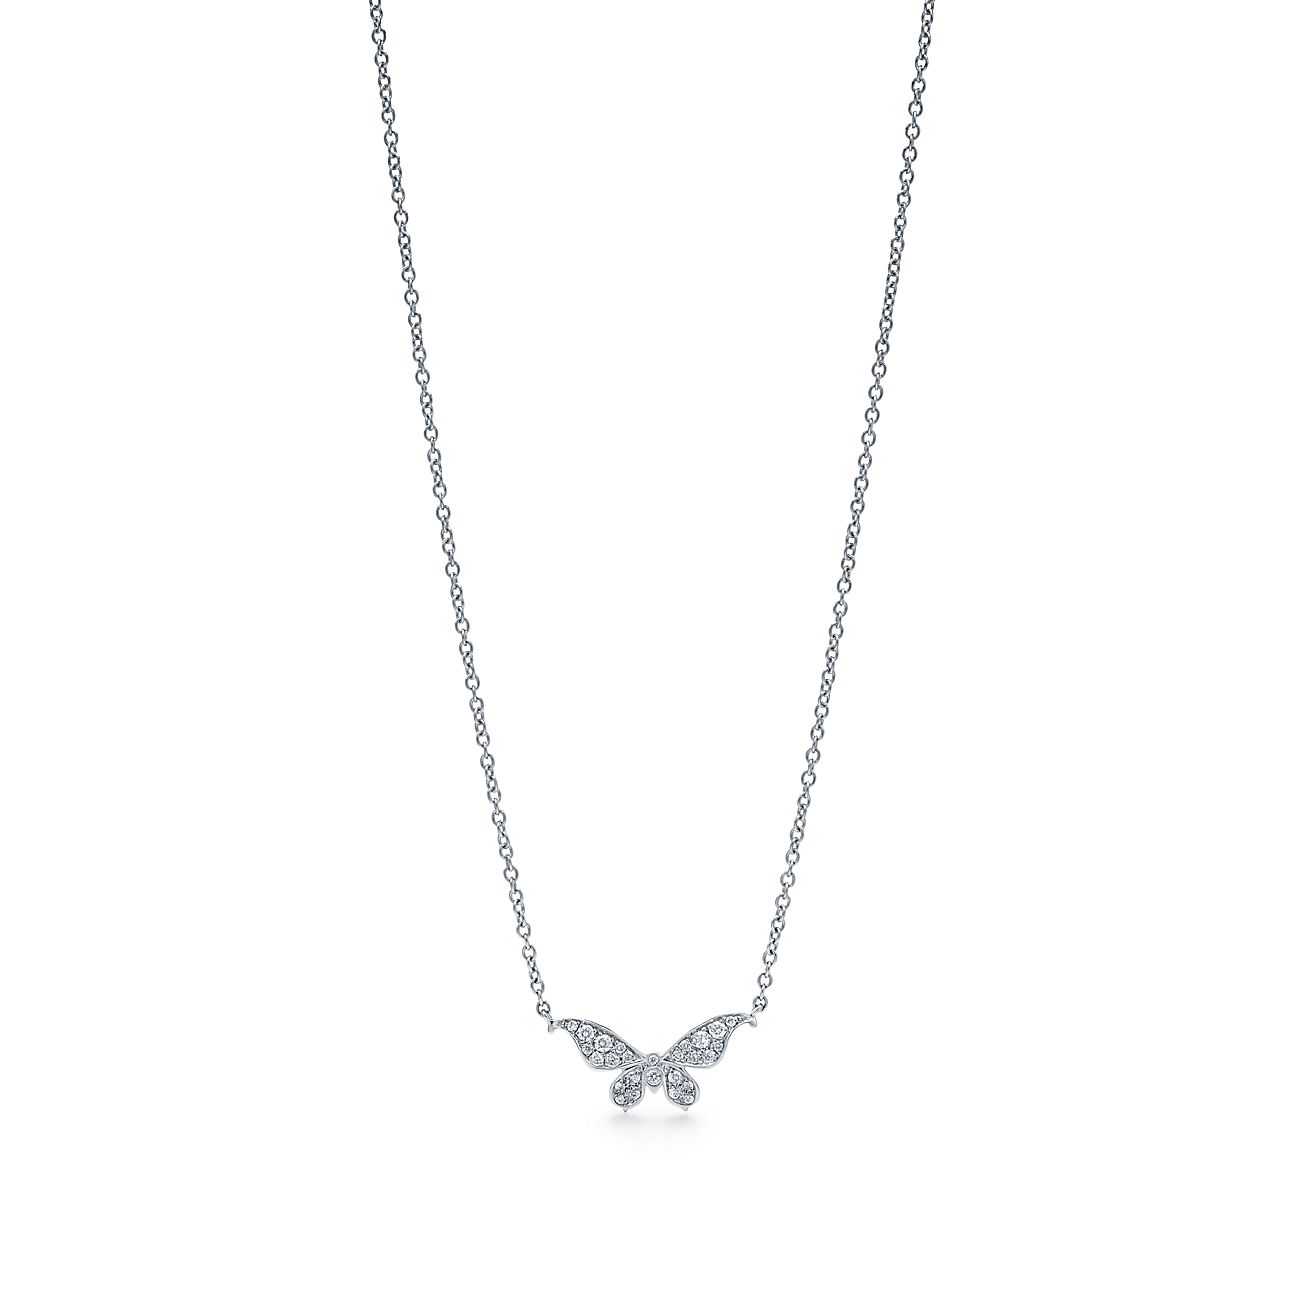 tiffany butterfly necklace